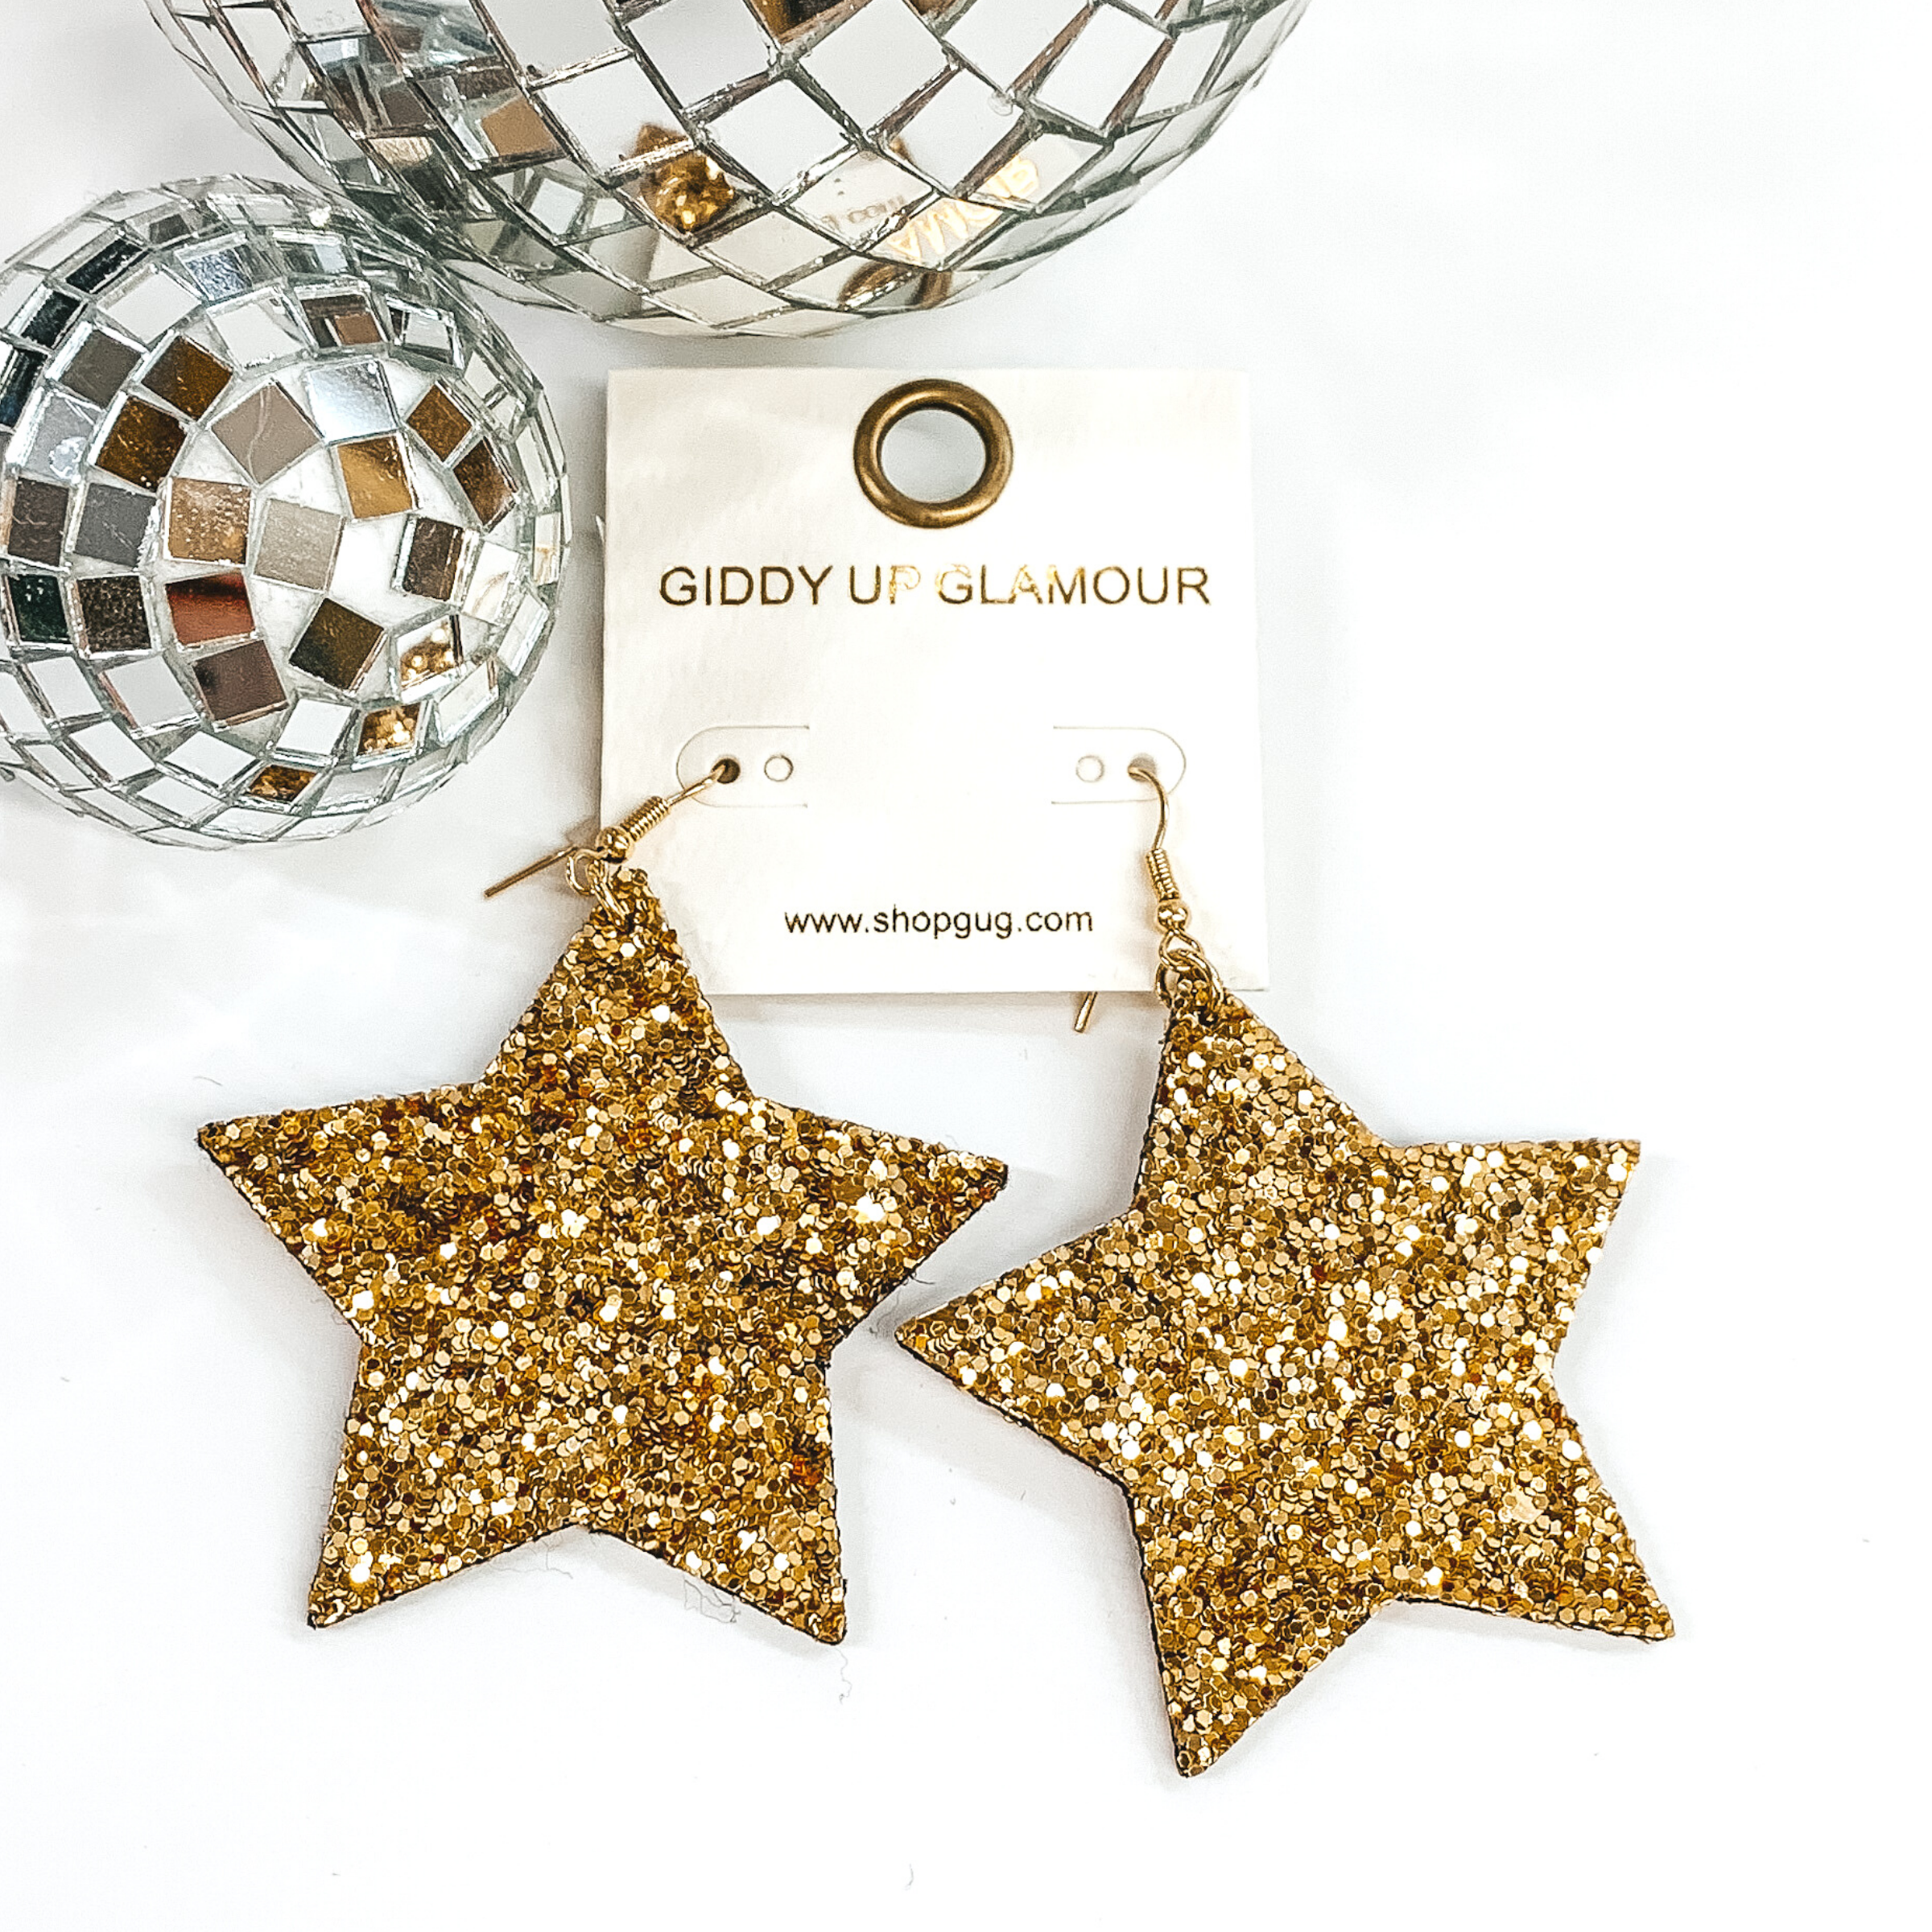 Glitter star dangle earrings in gold with a gold earrings hook. These earrings are pictured on a white background with a disco ball at the top of the picture.